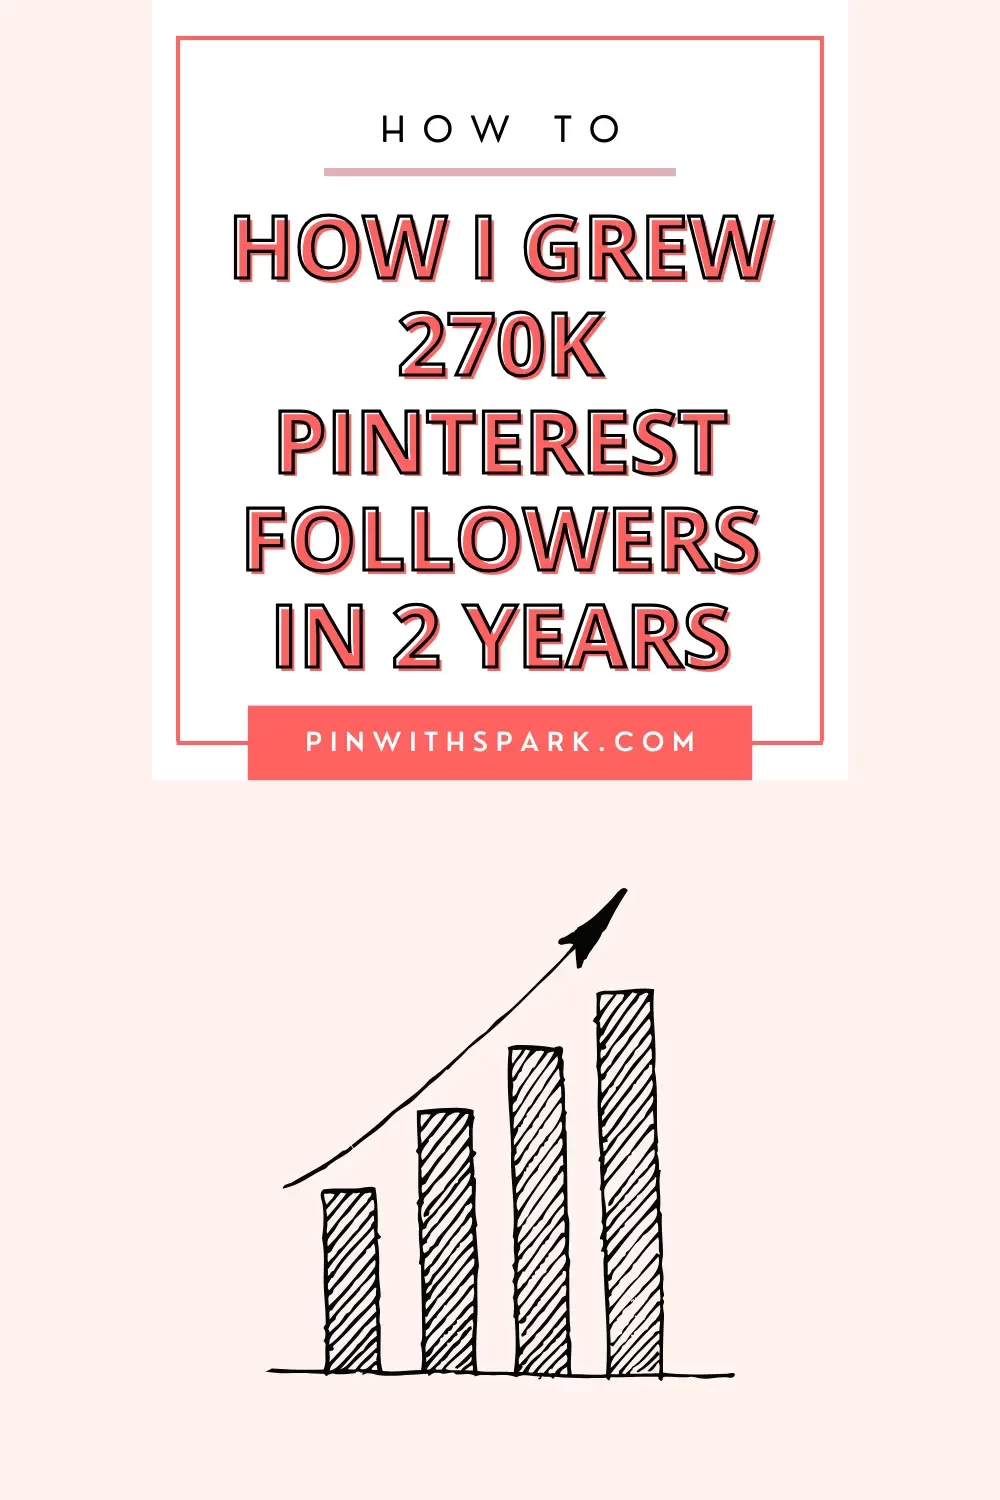 How I grew 270K followers in 2 years growth chart pinwithspark.com